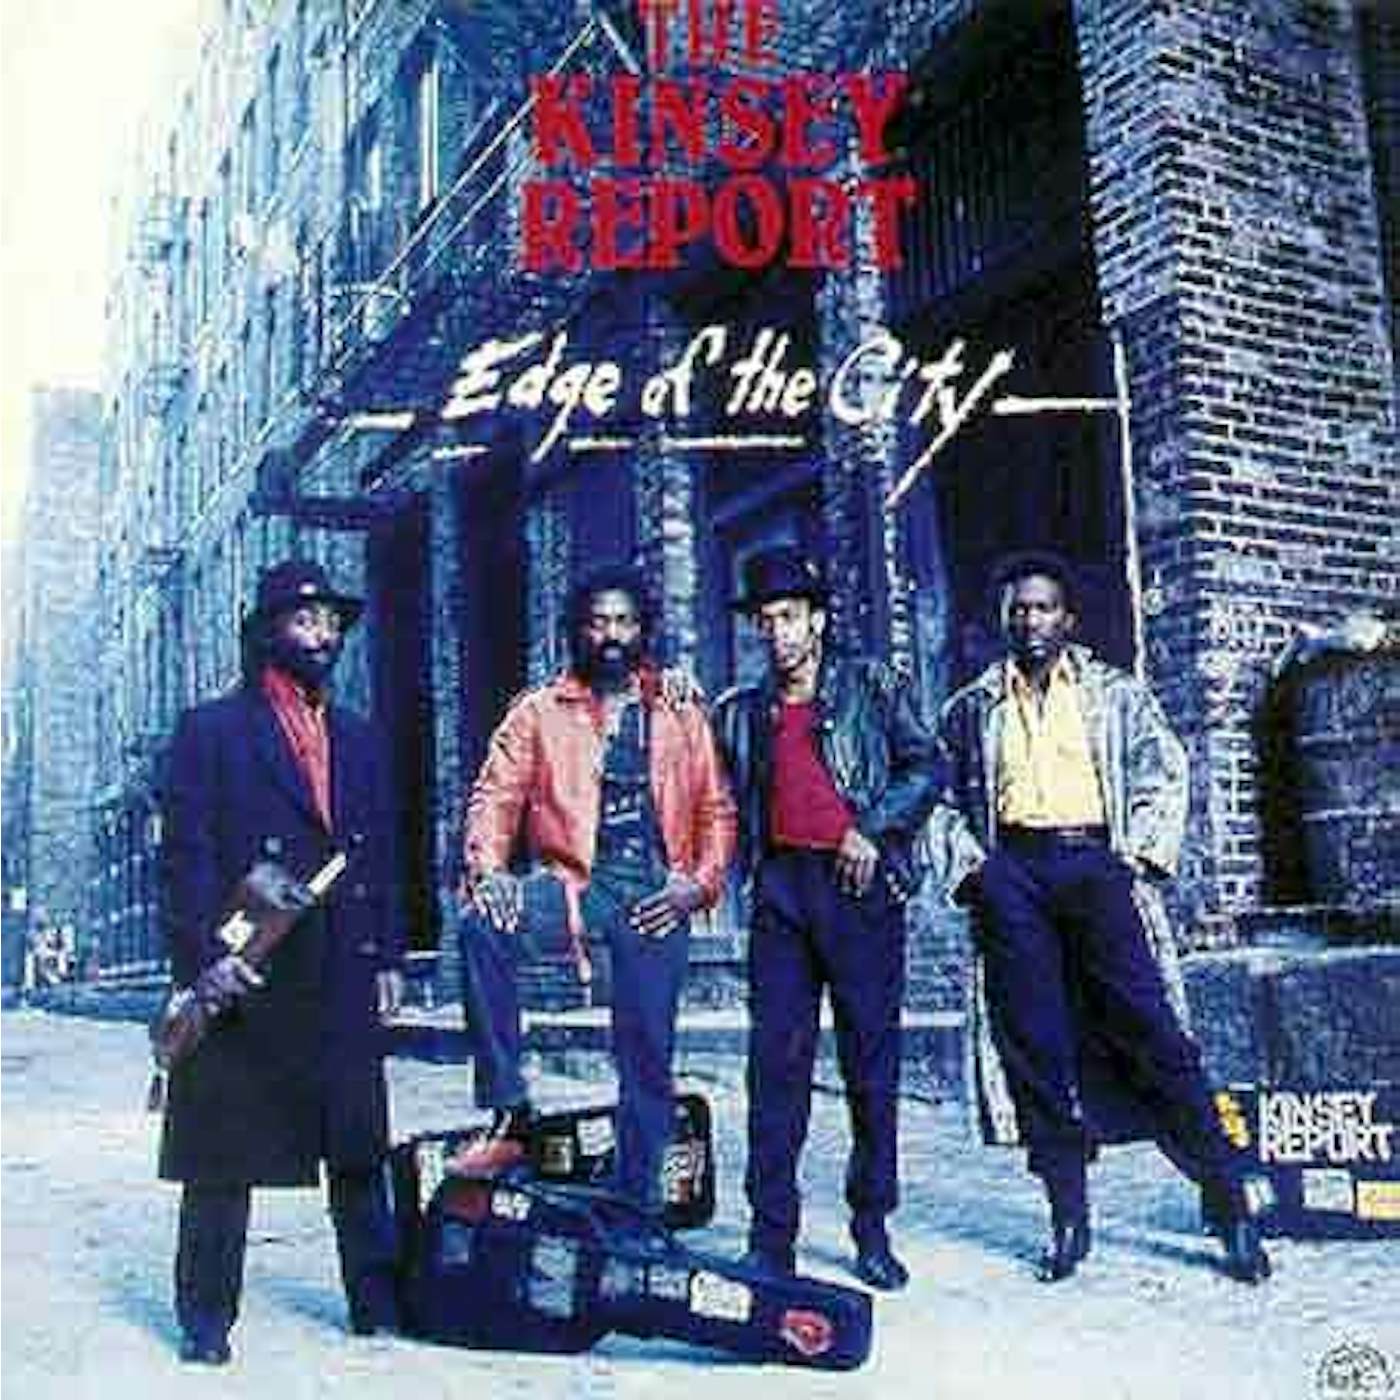 The Kinsey Report EDGE OF THE CITY CD